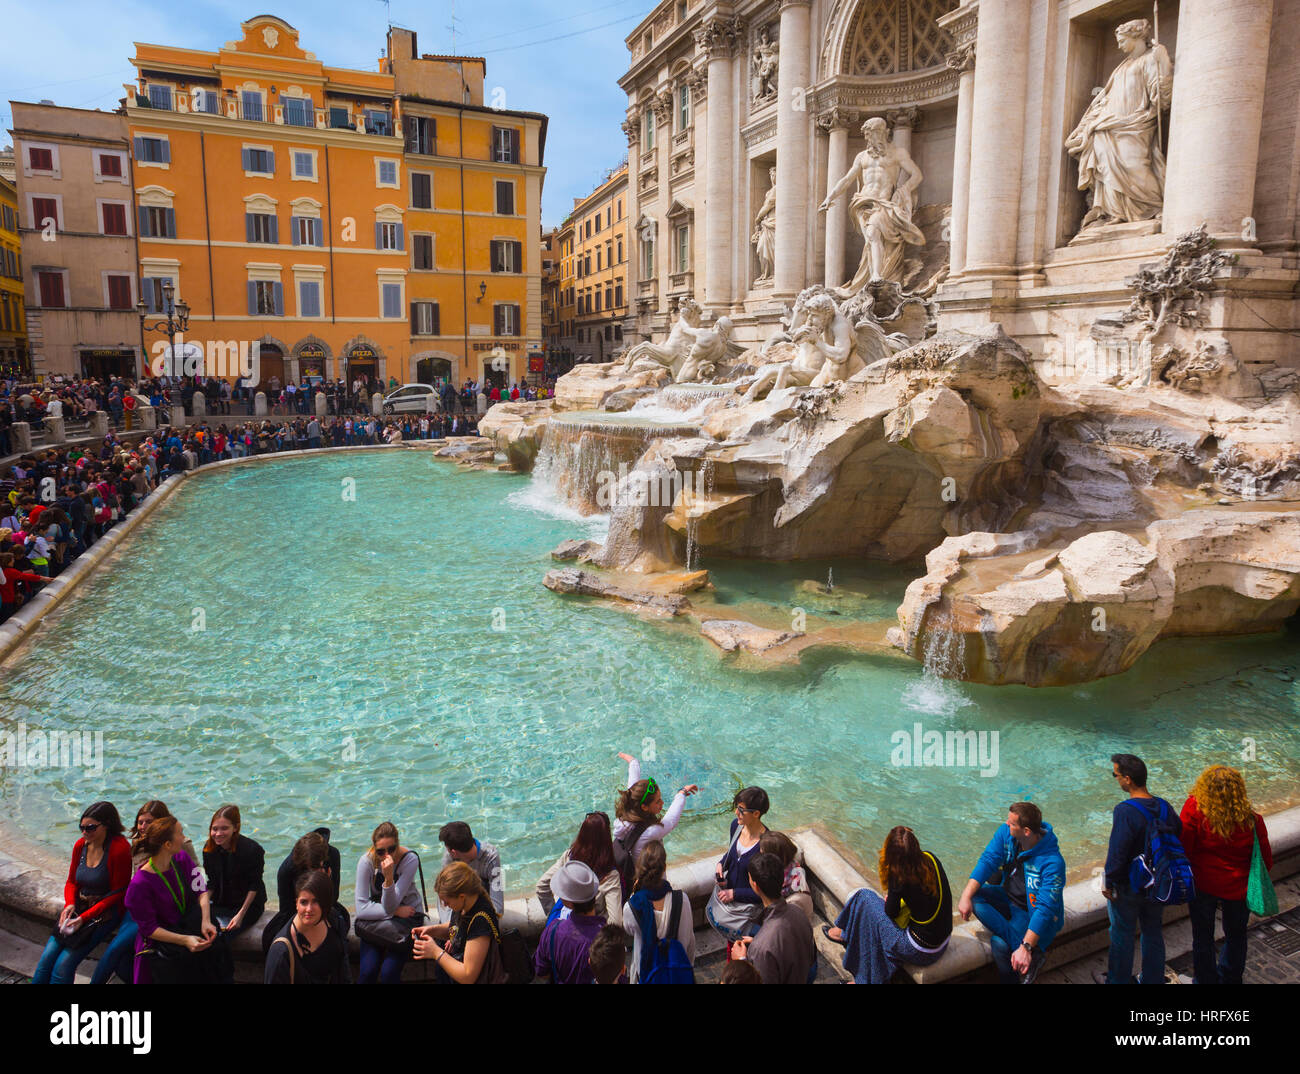 Rome, Italy. The 18th century Baroque Trevi Fountain designed by Nicola Salvi.  The  Historic Centre of Rome is a UNESCO World Heritage Site. Stock Photo